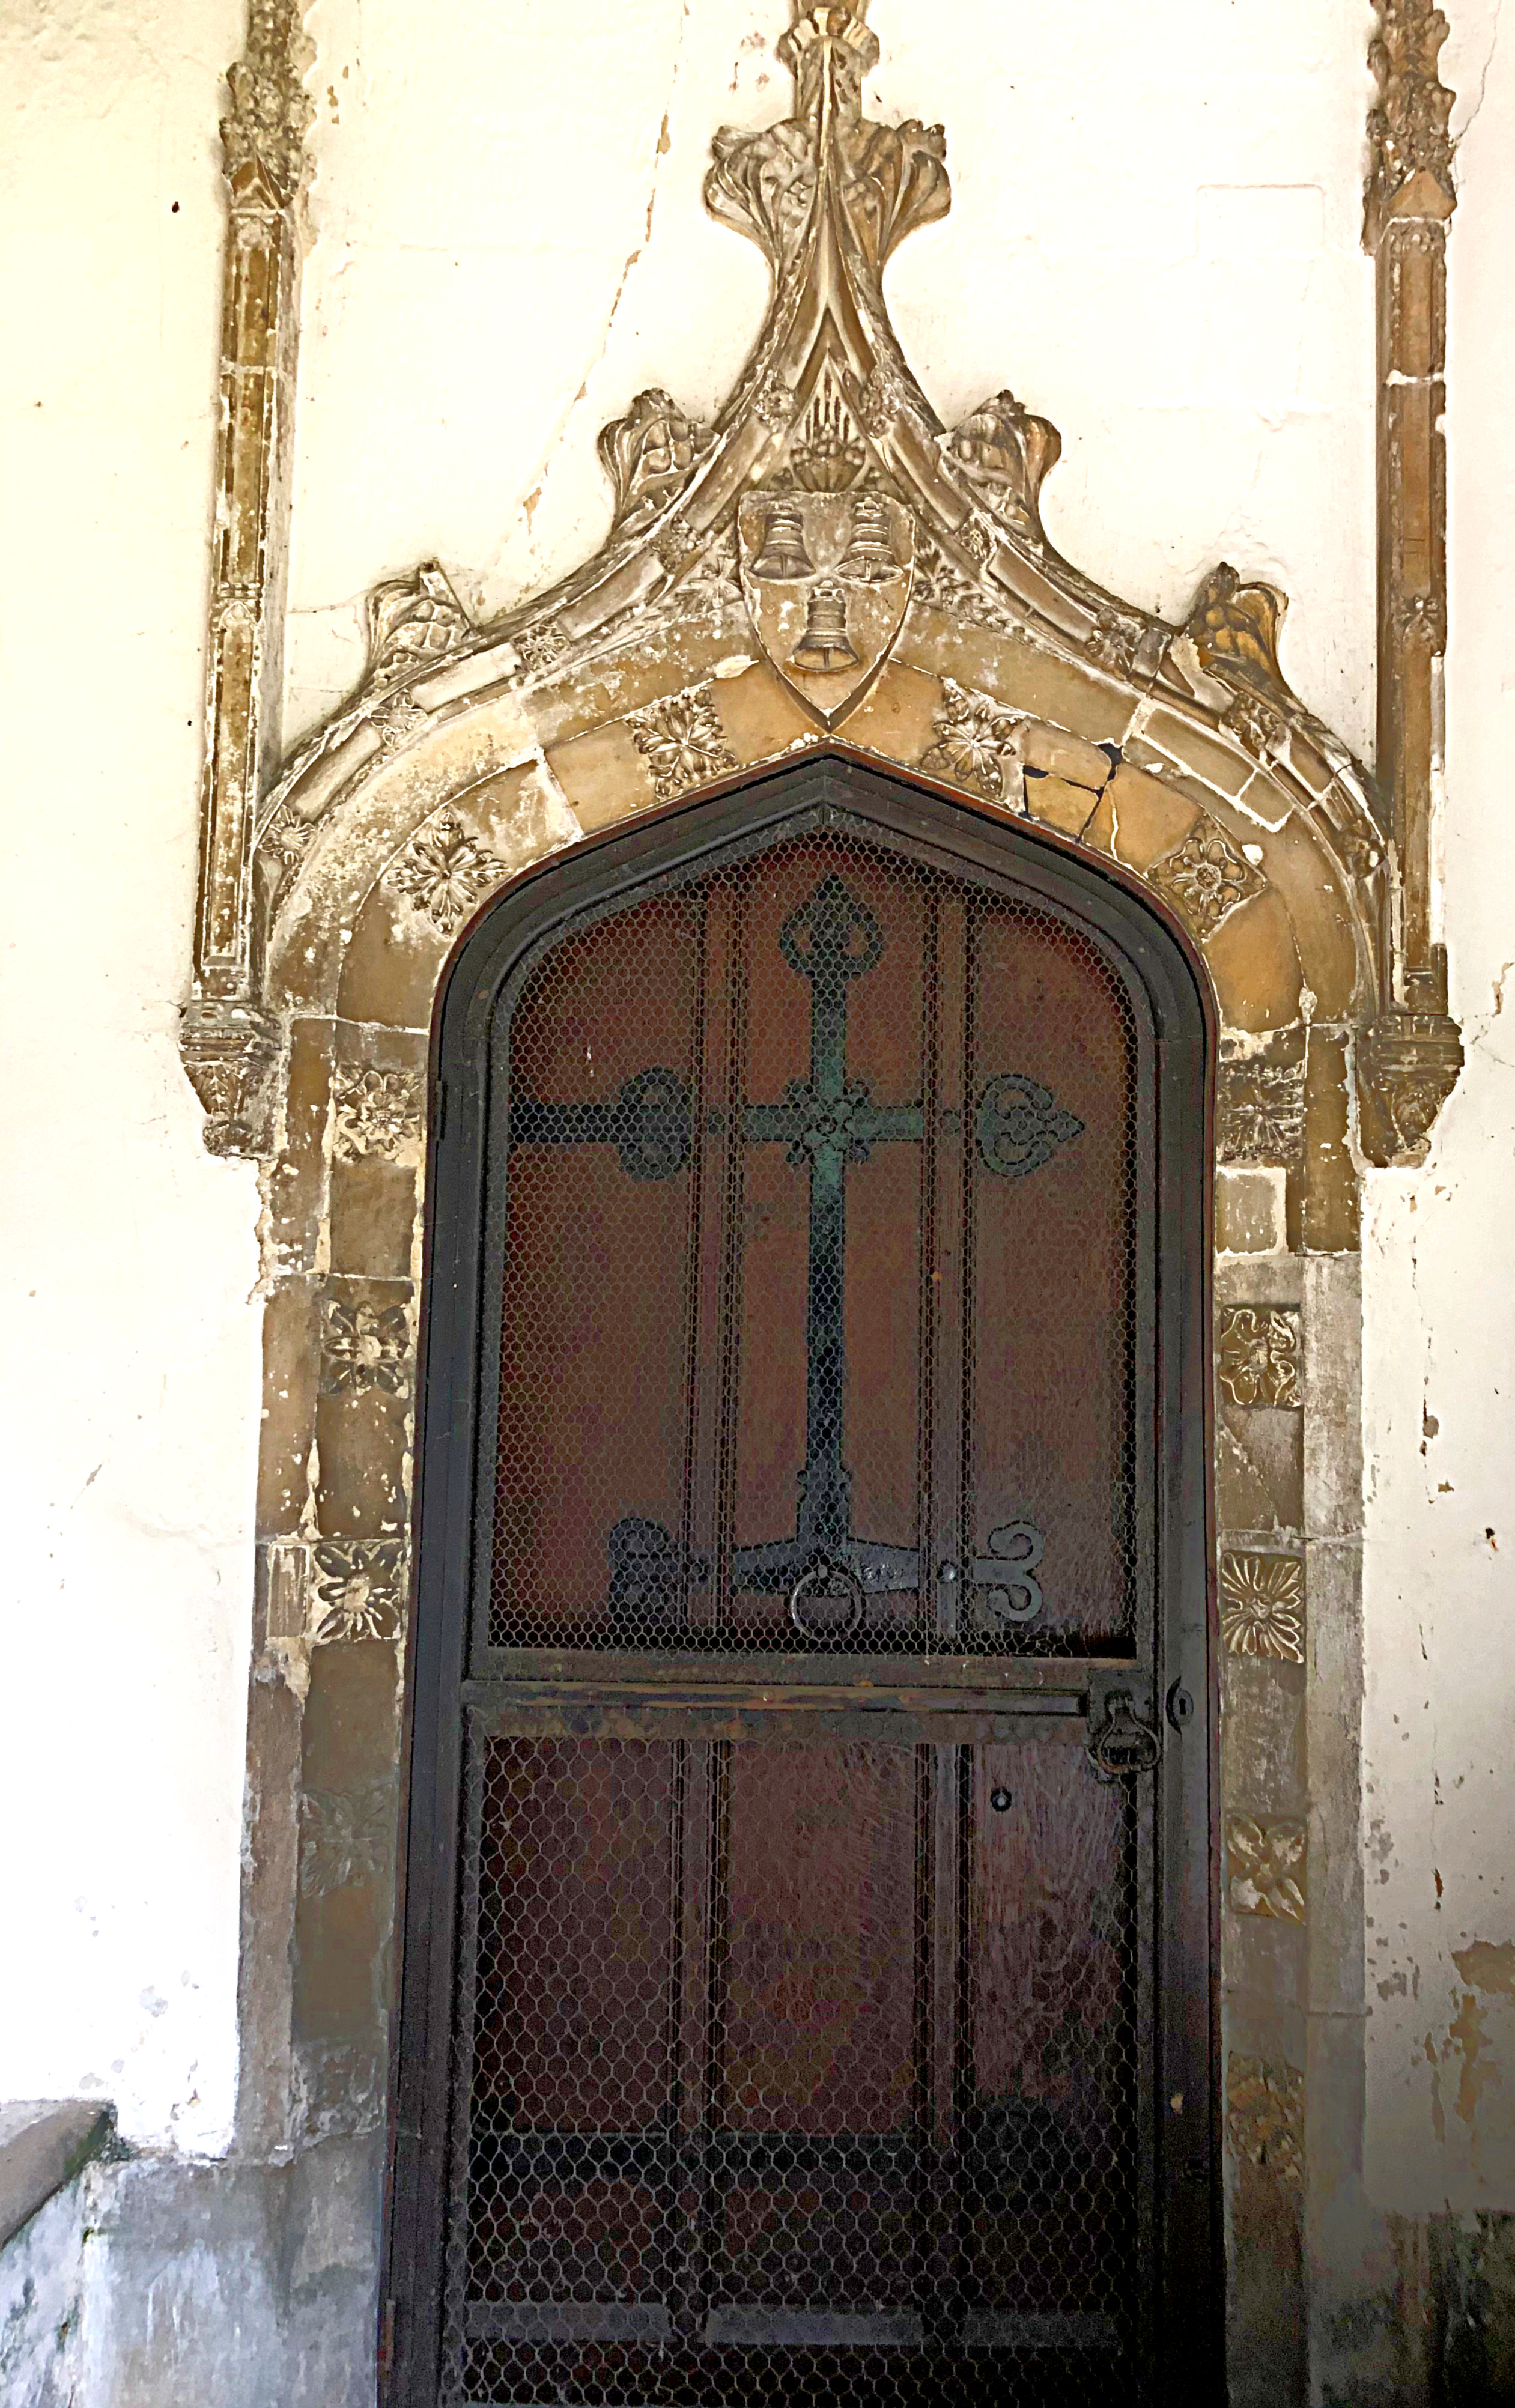 The doorway from the original medieval manor, now in position in the church